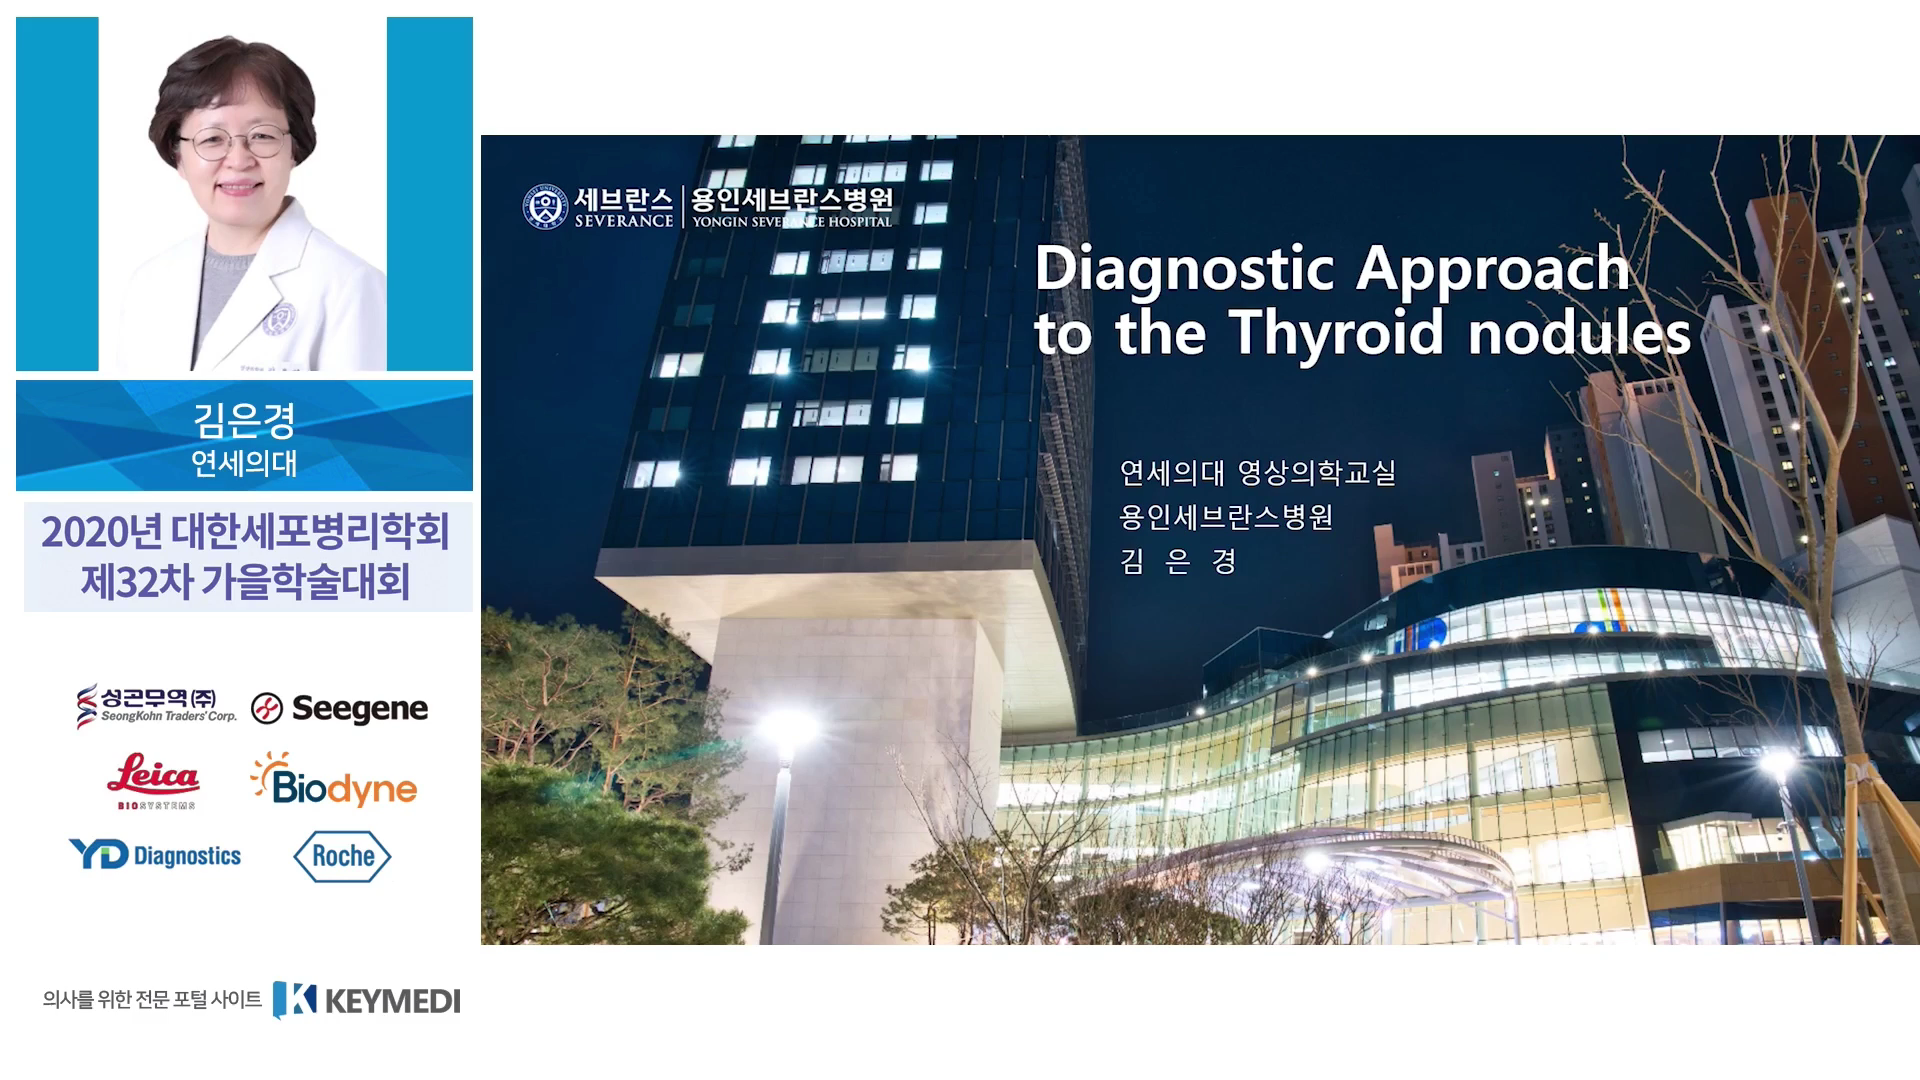 Diagnostic approach to the thyroid nodules